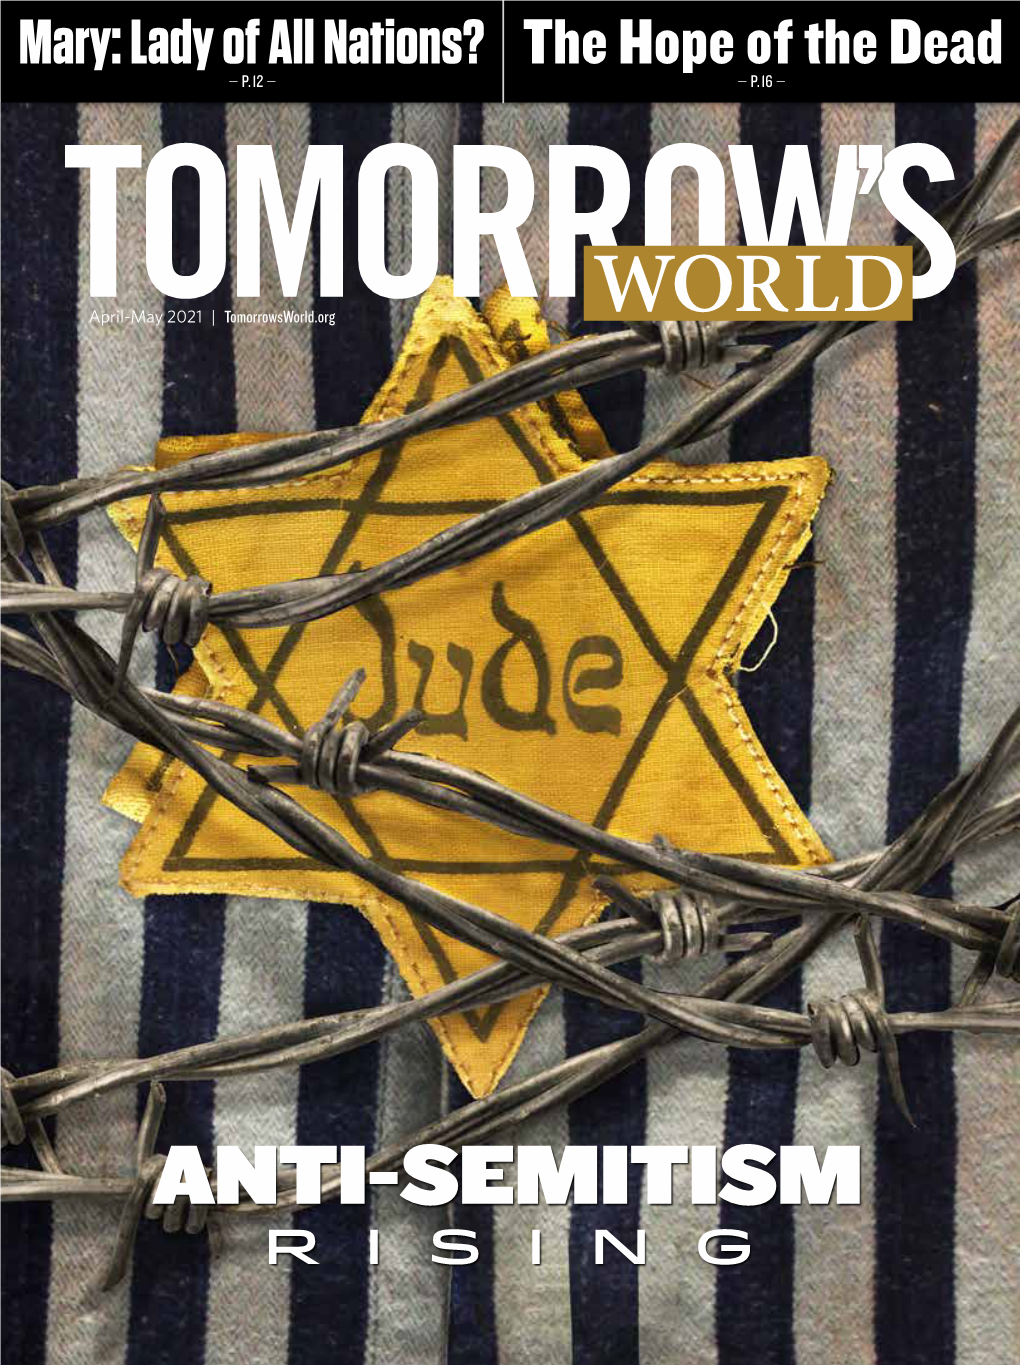 ANTI-SEMITISM RISING a Personal Message from the Editor in Chief